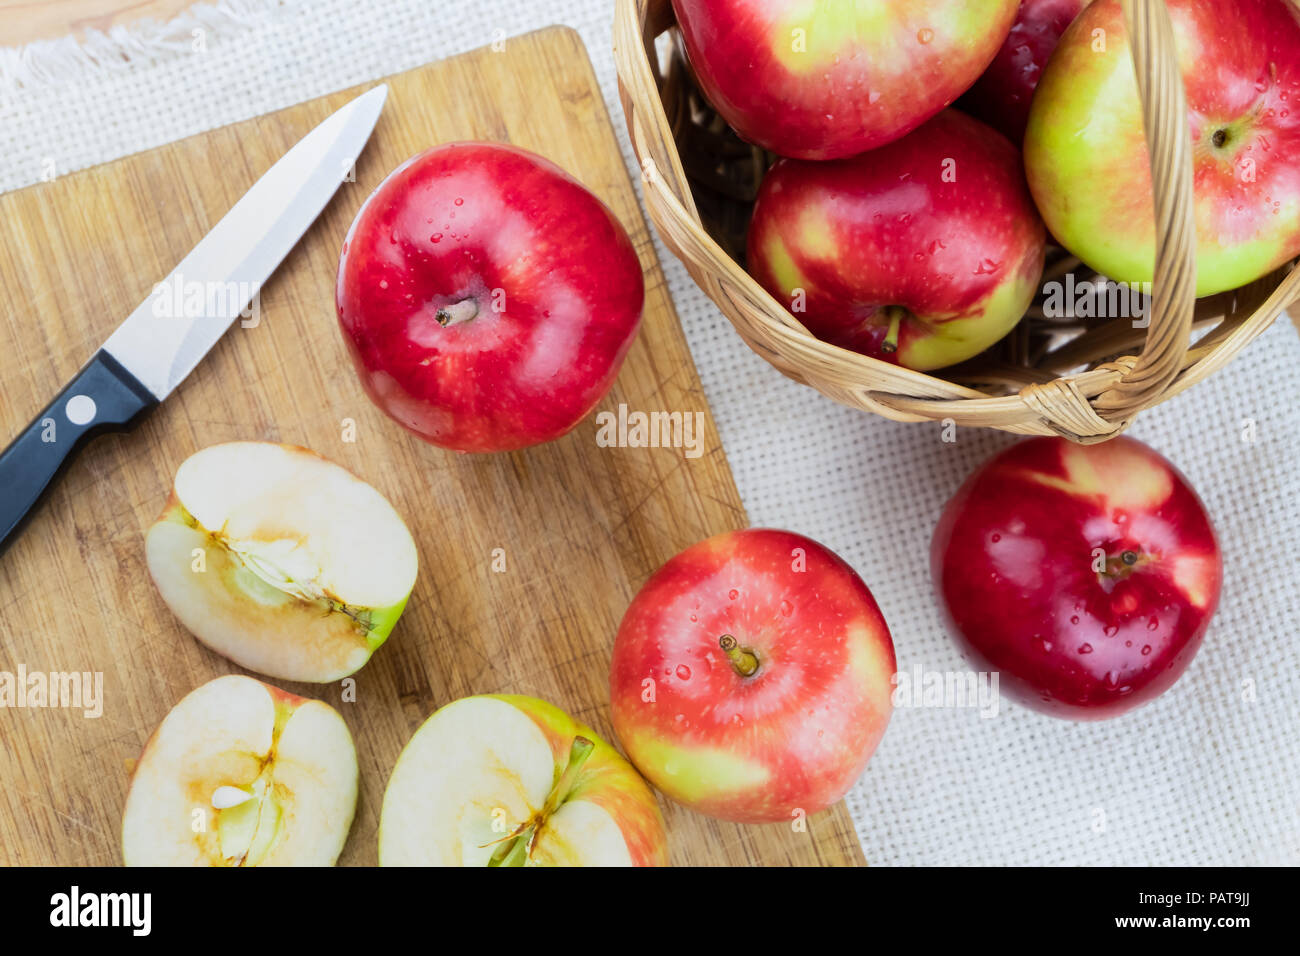 Top view of ripe juicy apples on rustic wooden table. Home grown organic apples and knife, shot from above Stock Photo